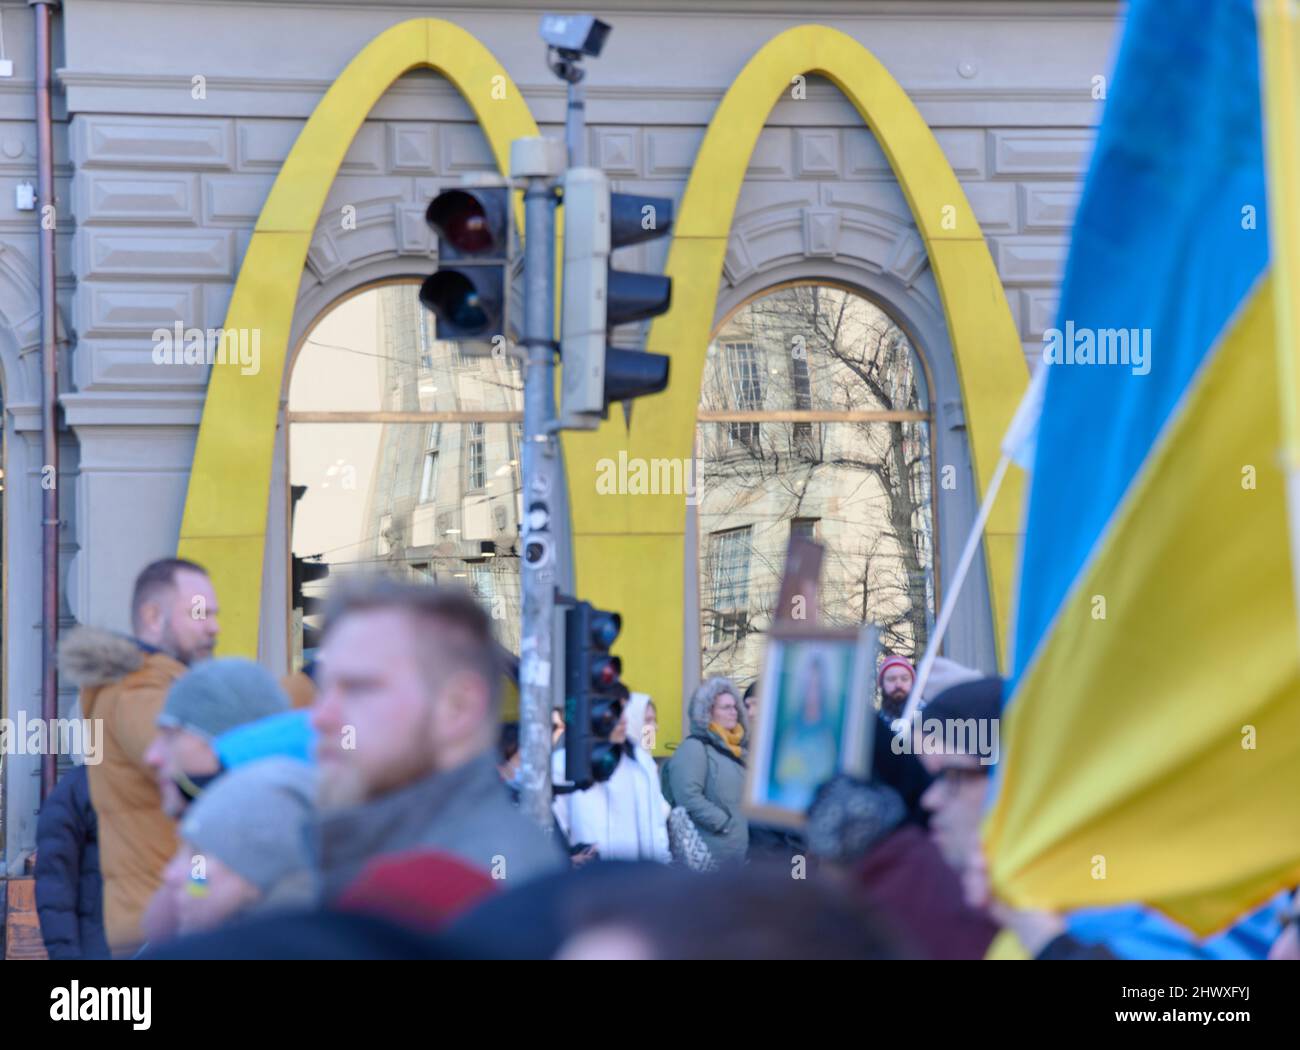 Helsinki, Finland - March 5, 2022: Yellow Mcdonald’s Golden Arches logo on the side of the building with a rally against Russia’s military actions and Stock Photo